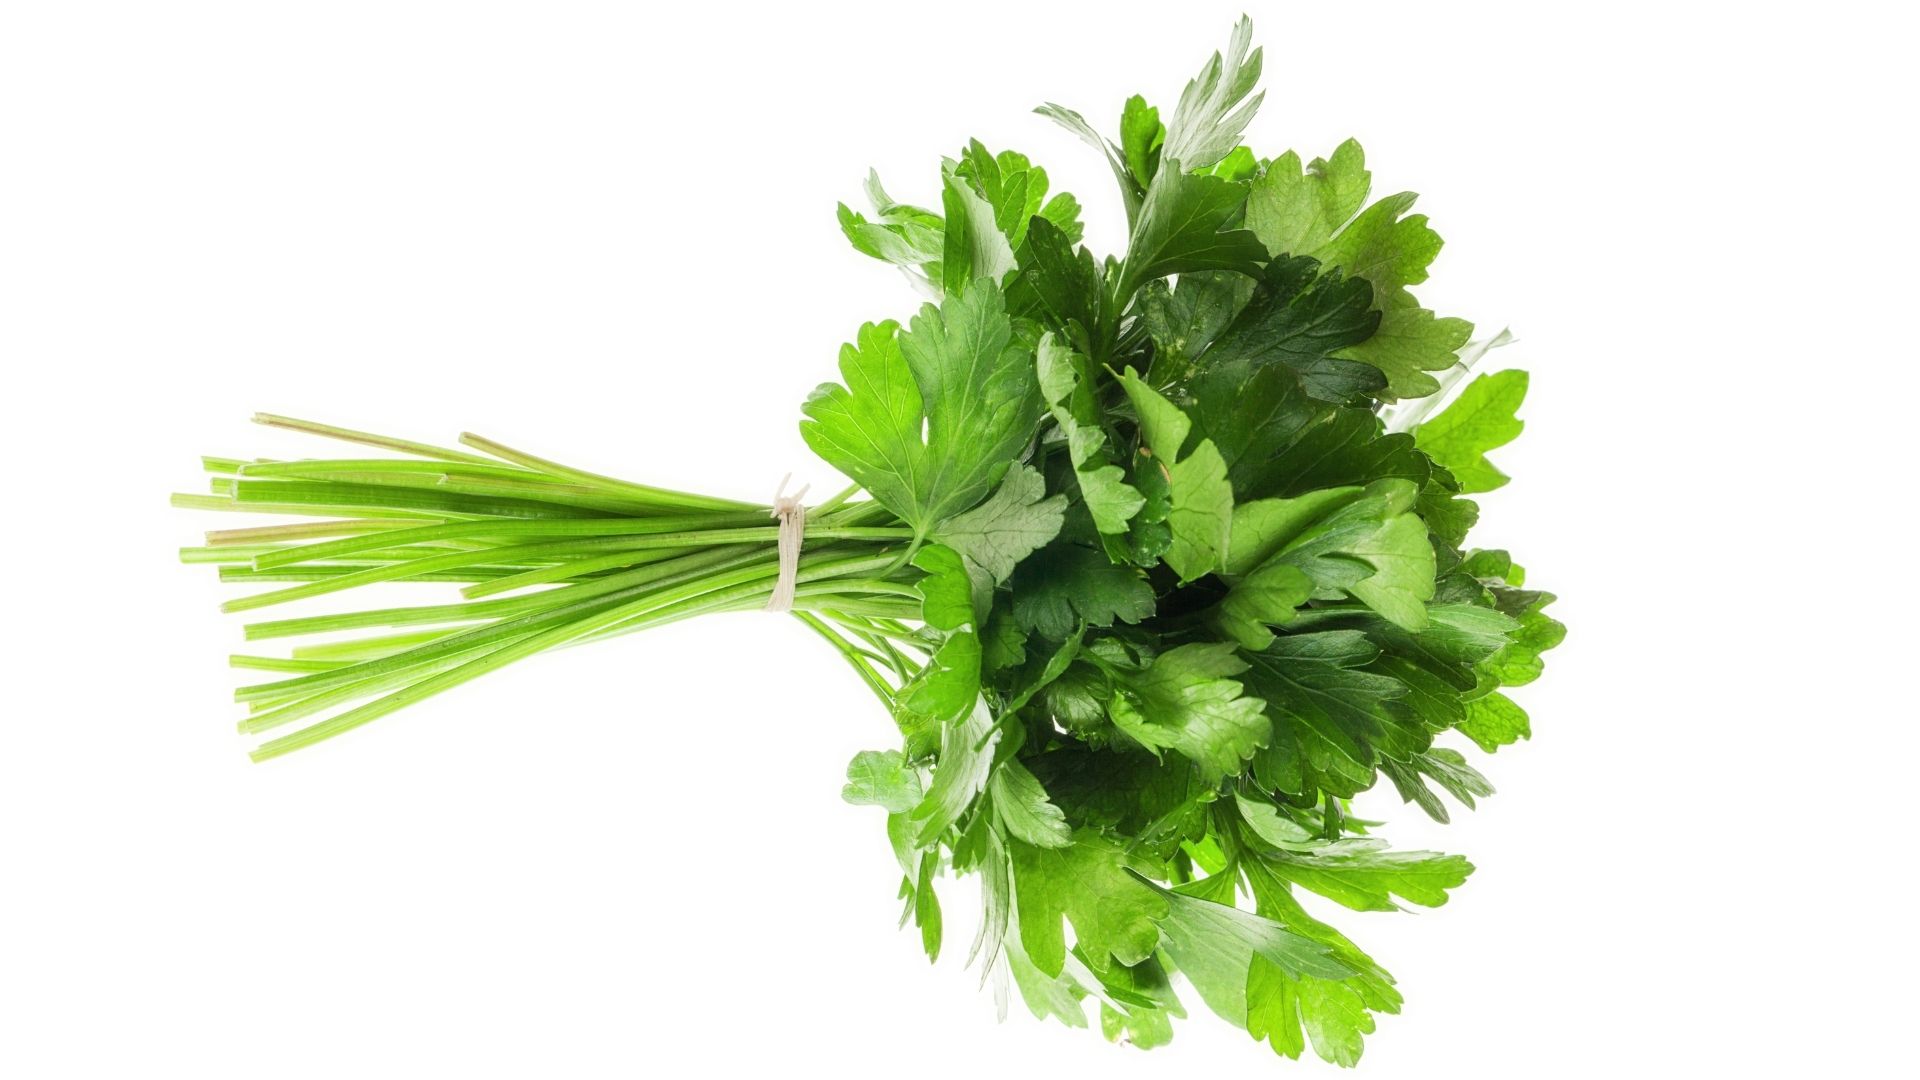 bunch of parsley on white background